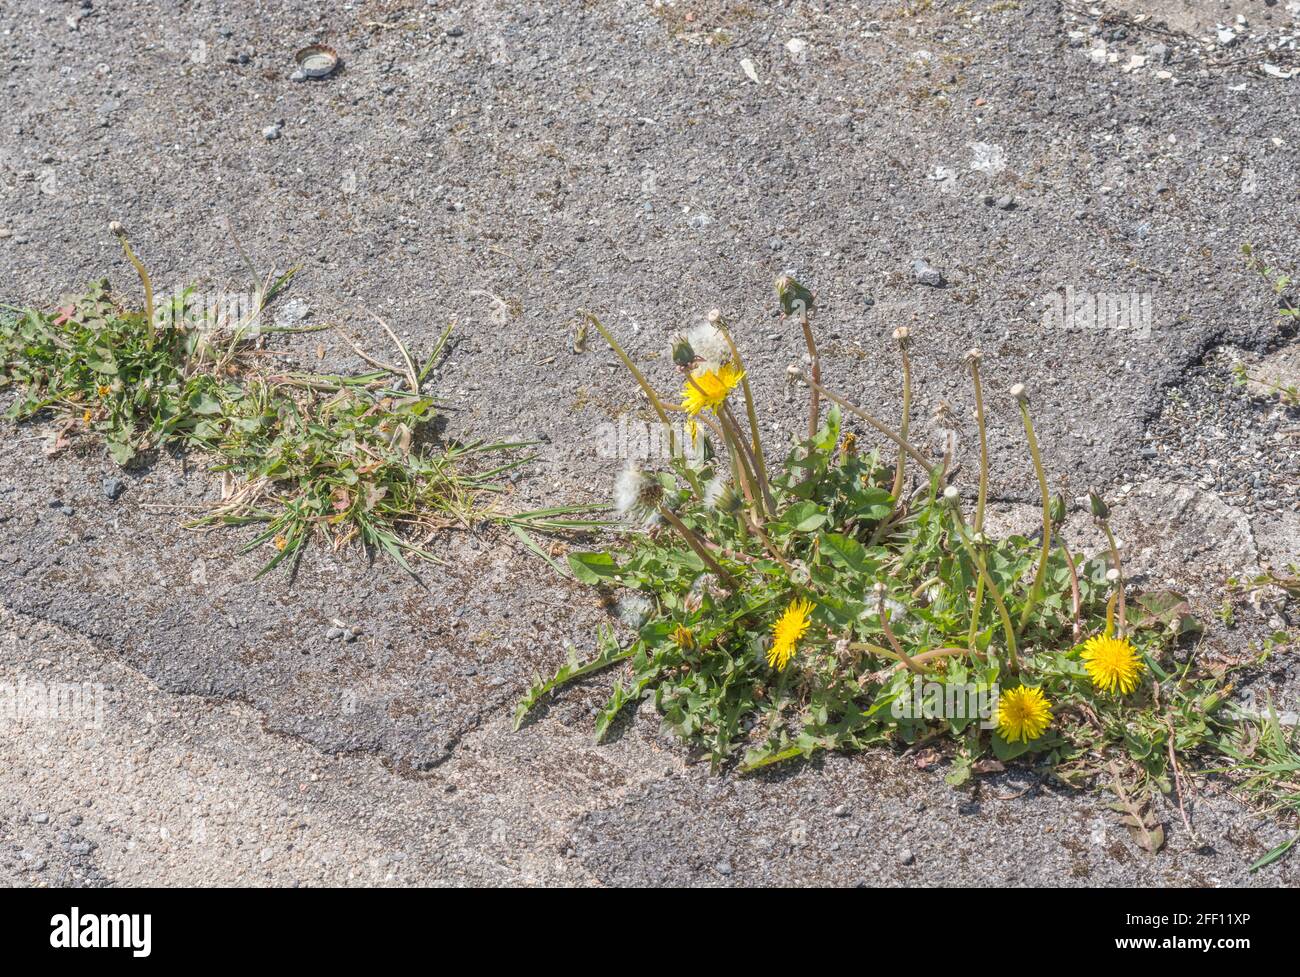 Springtime yellow Dandelion / Taraxacum officinale flowers growing in tarmac. Dandelion once used in medicinal herbal cures & also leaves edible. Stock Photo